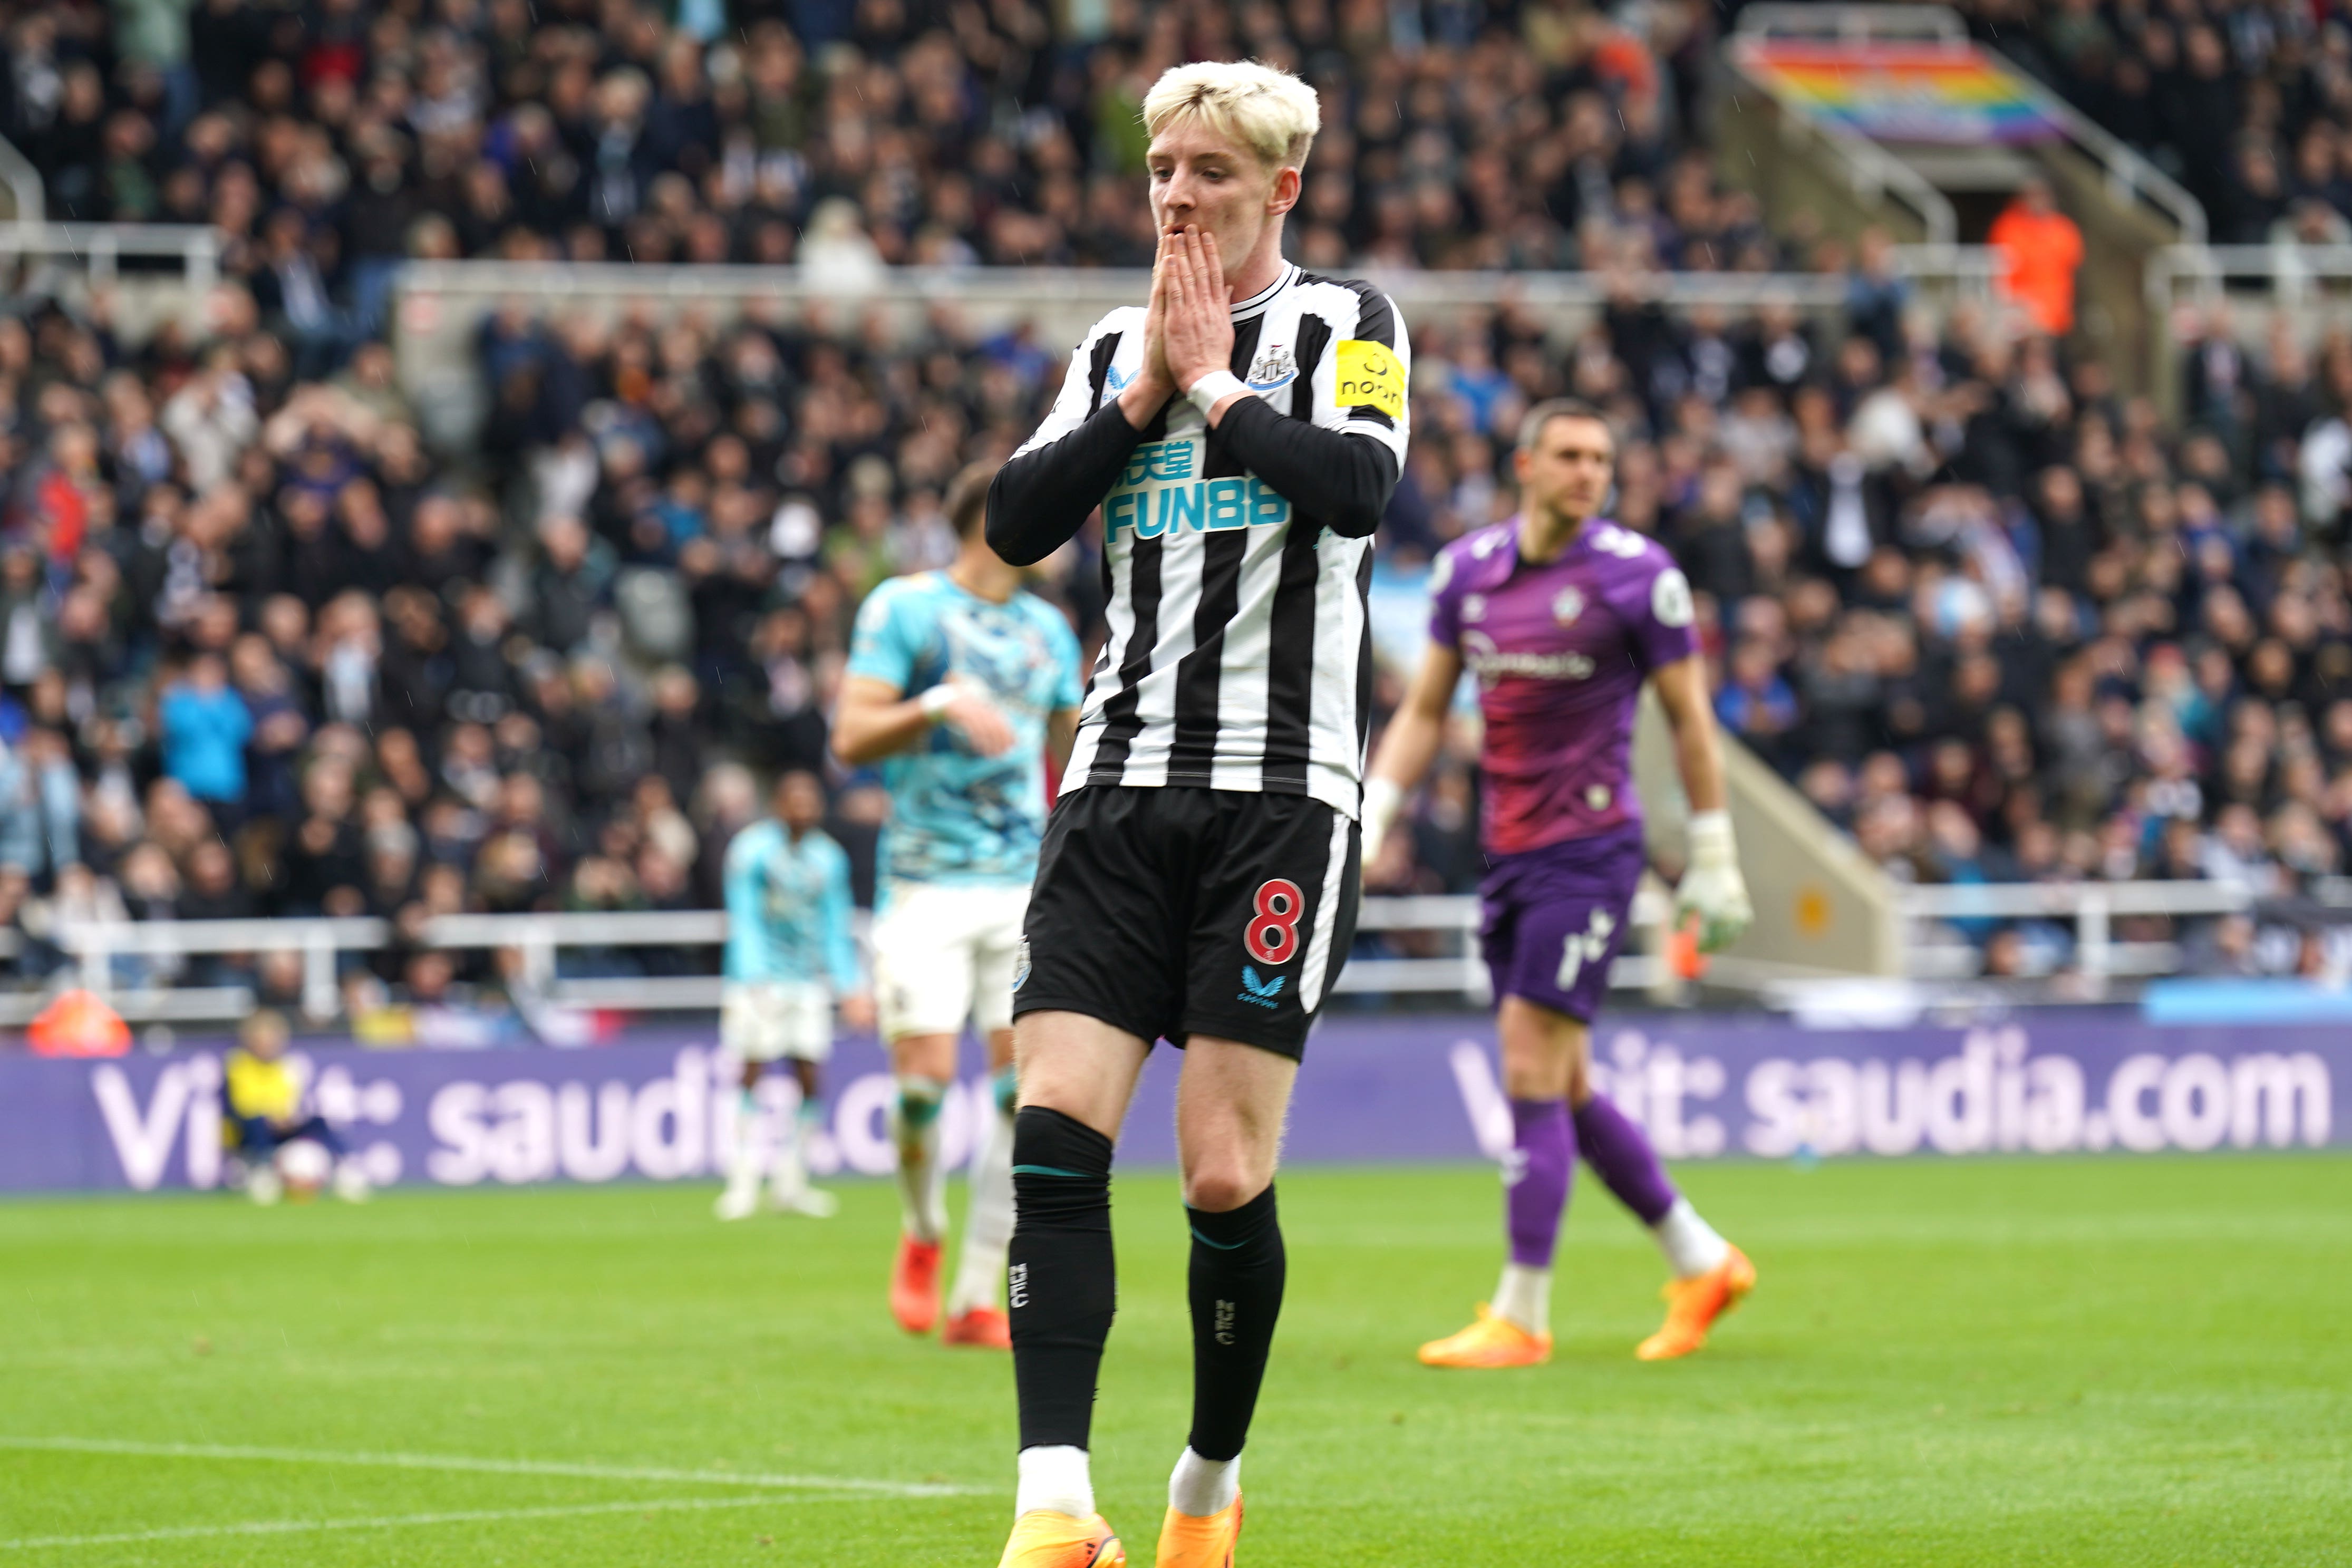 Newcastle’s Anthony Gordon rues a missed chance during Sunday’s 3-1 Premier League win over Southampton (Owen Humphreys/PA)